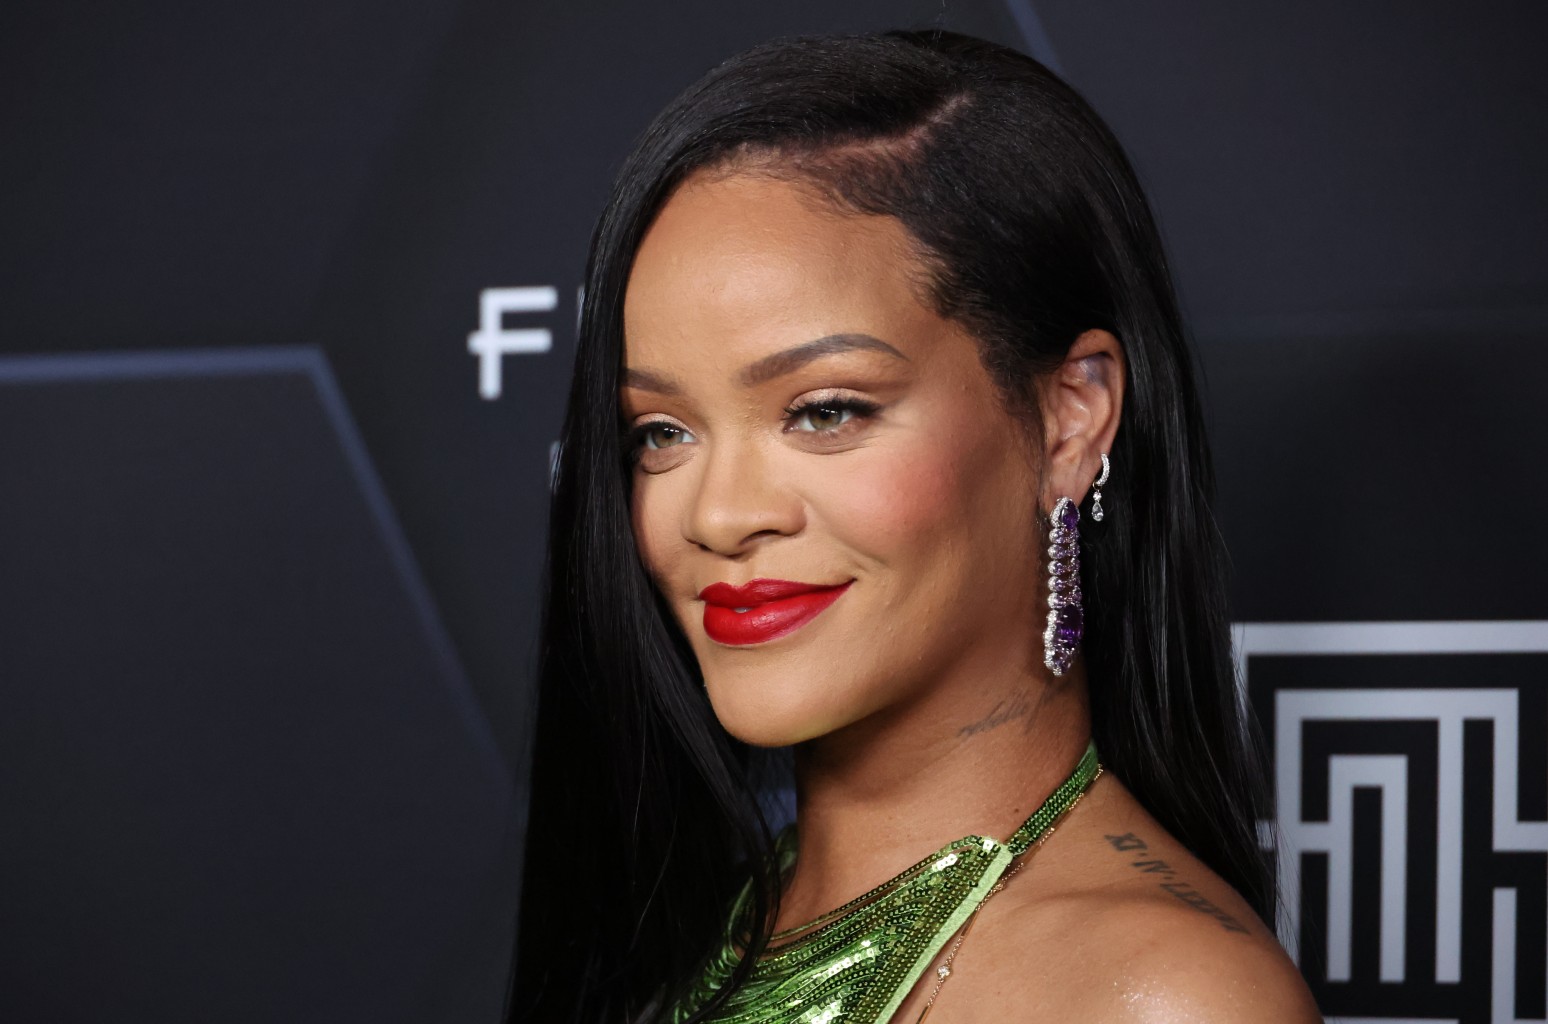 Dr. Dre says Rihanna “has the opportunity to really blow us away” with